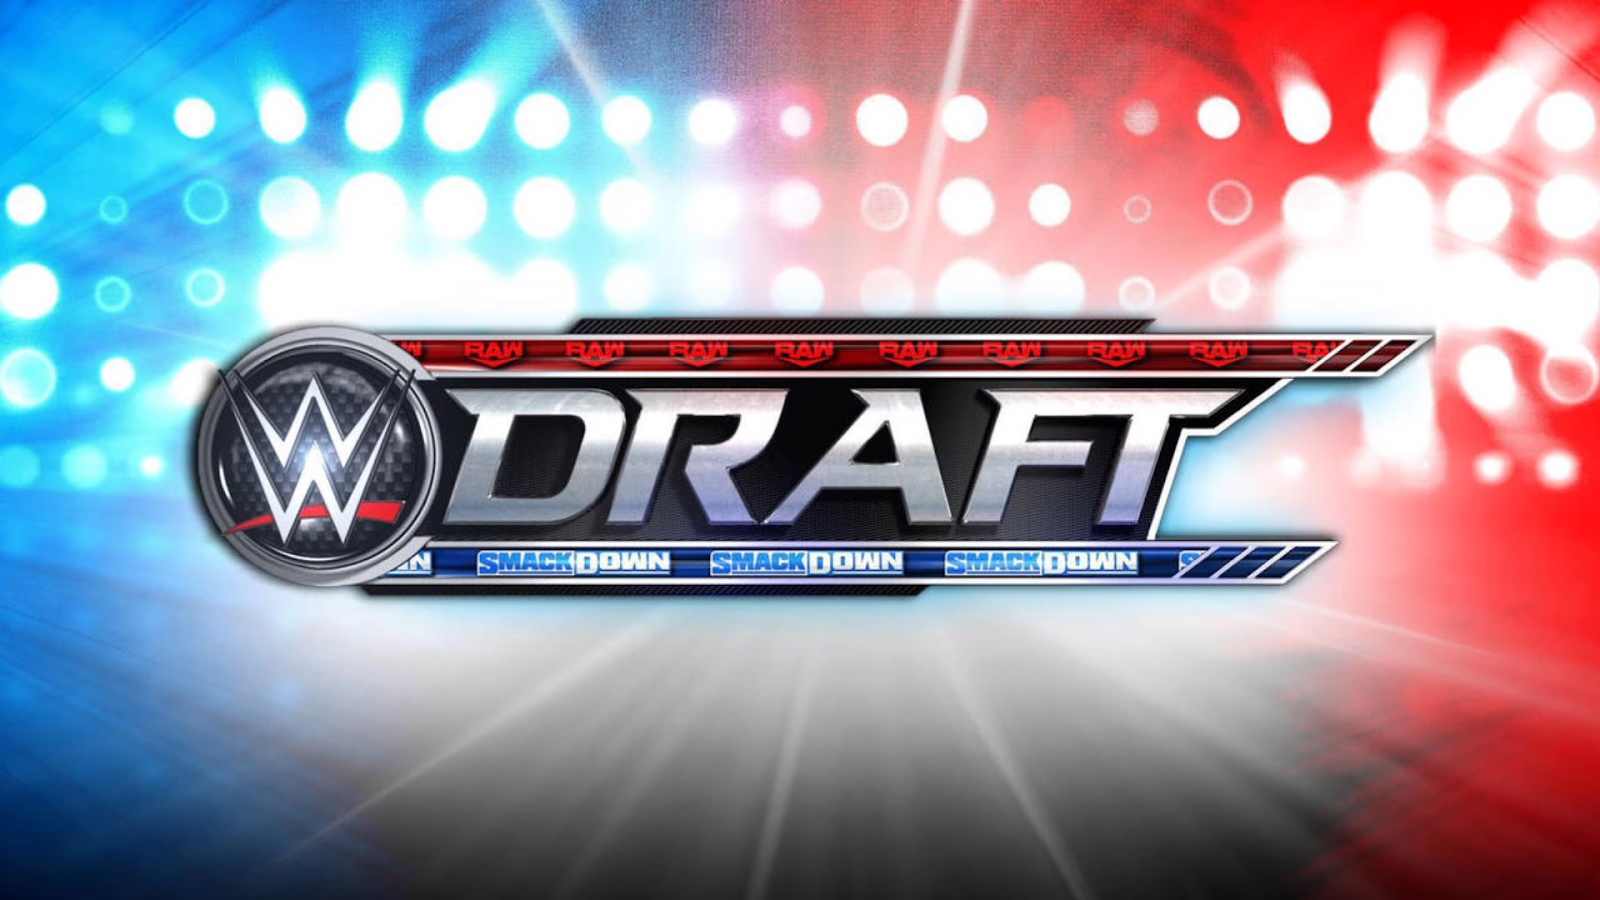 Potential update on when the next WWE Draft will take place: According to recent speculations, World Wrestling Entertainment (WWE)